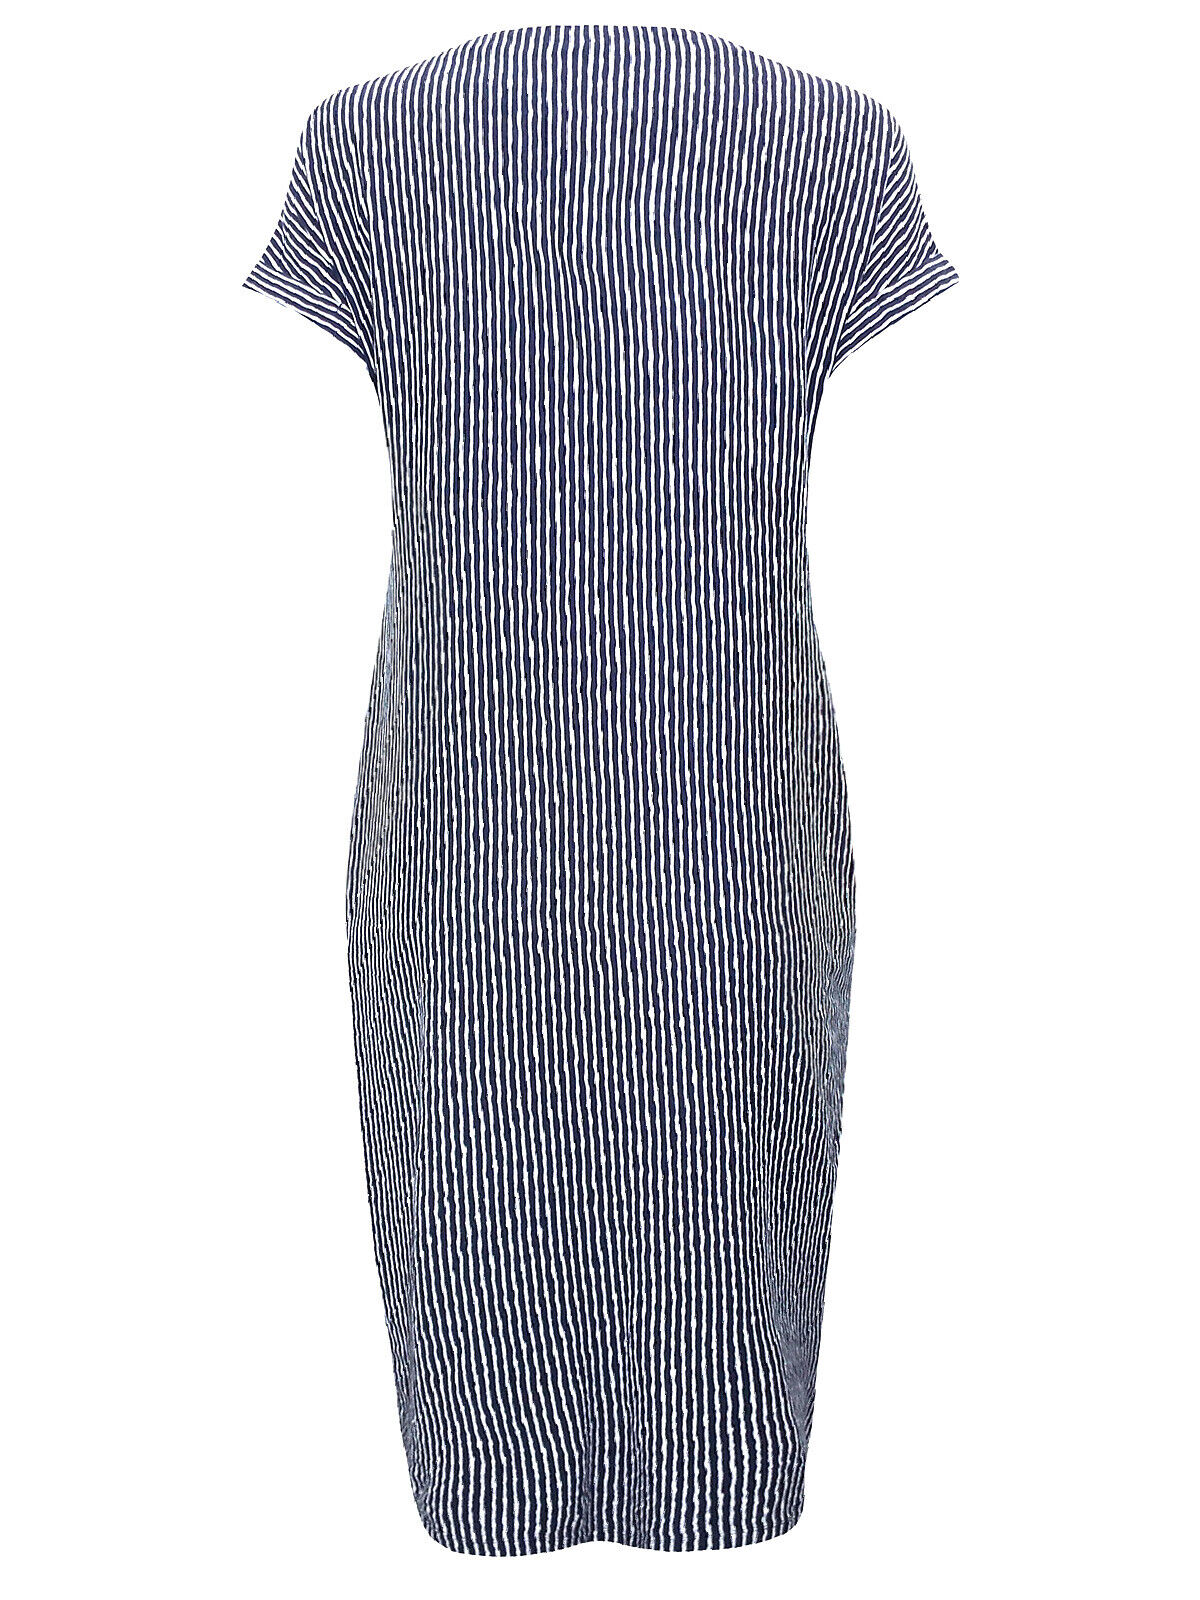 EX WHITE STUFF Navy Tilly Dress Sizes 8, 10, 12 RRP £55 COMES WITH NO BELT